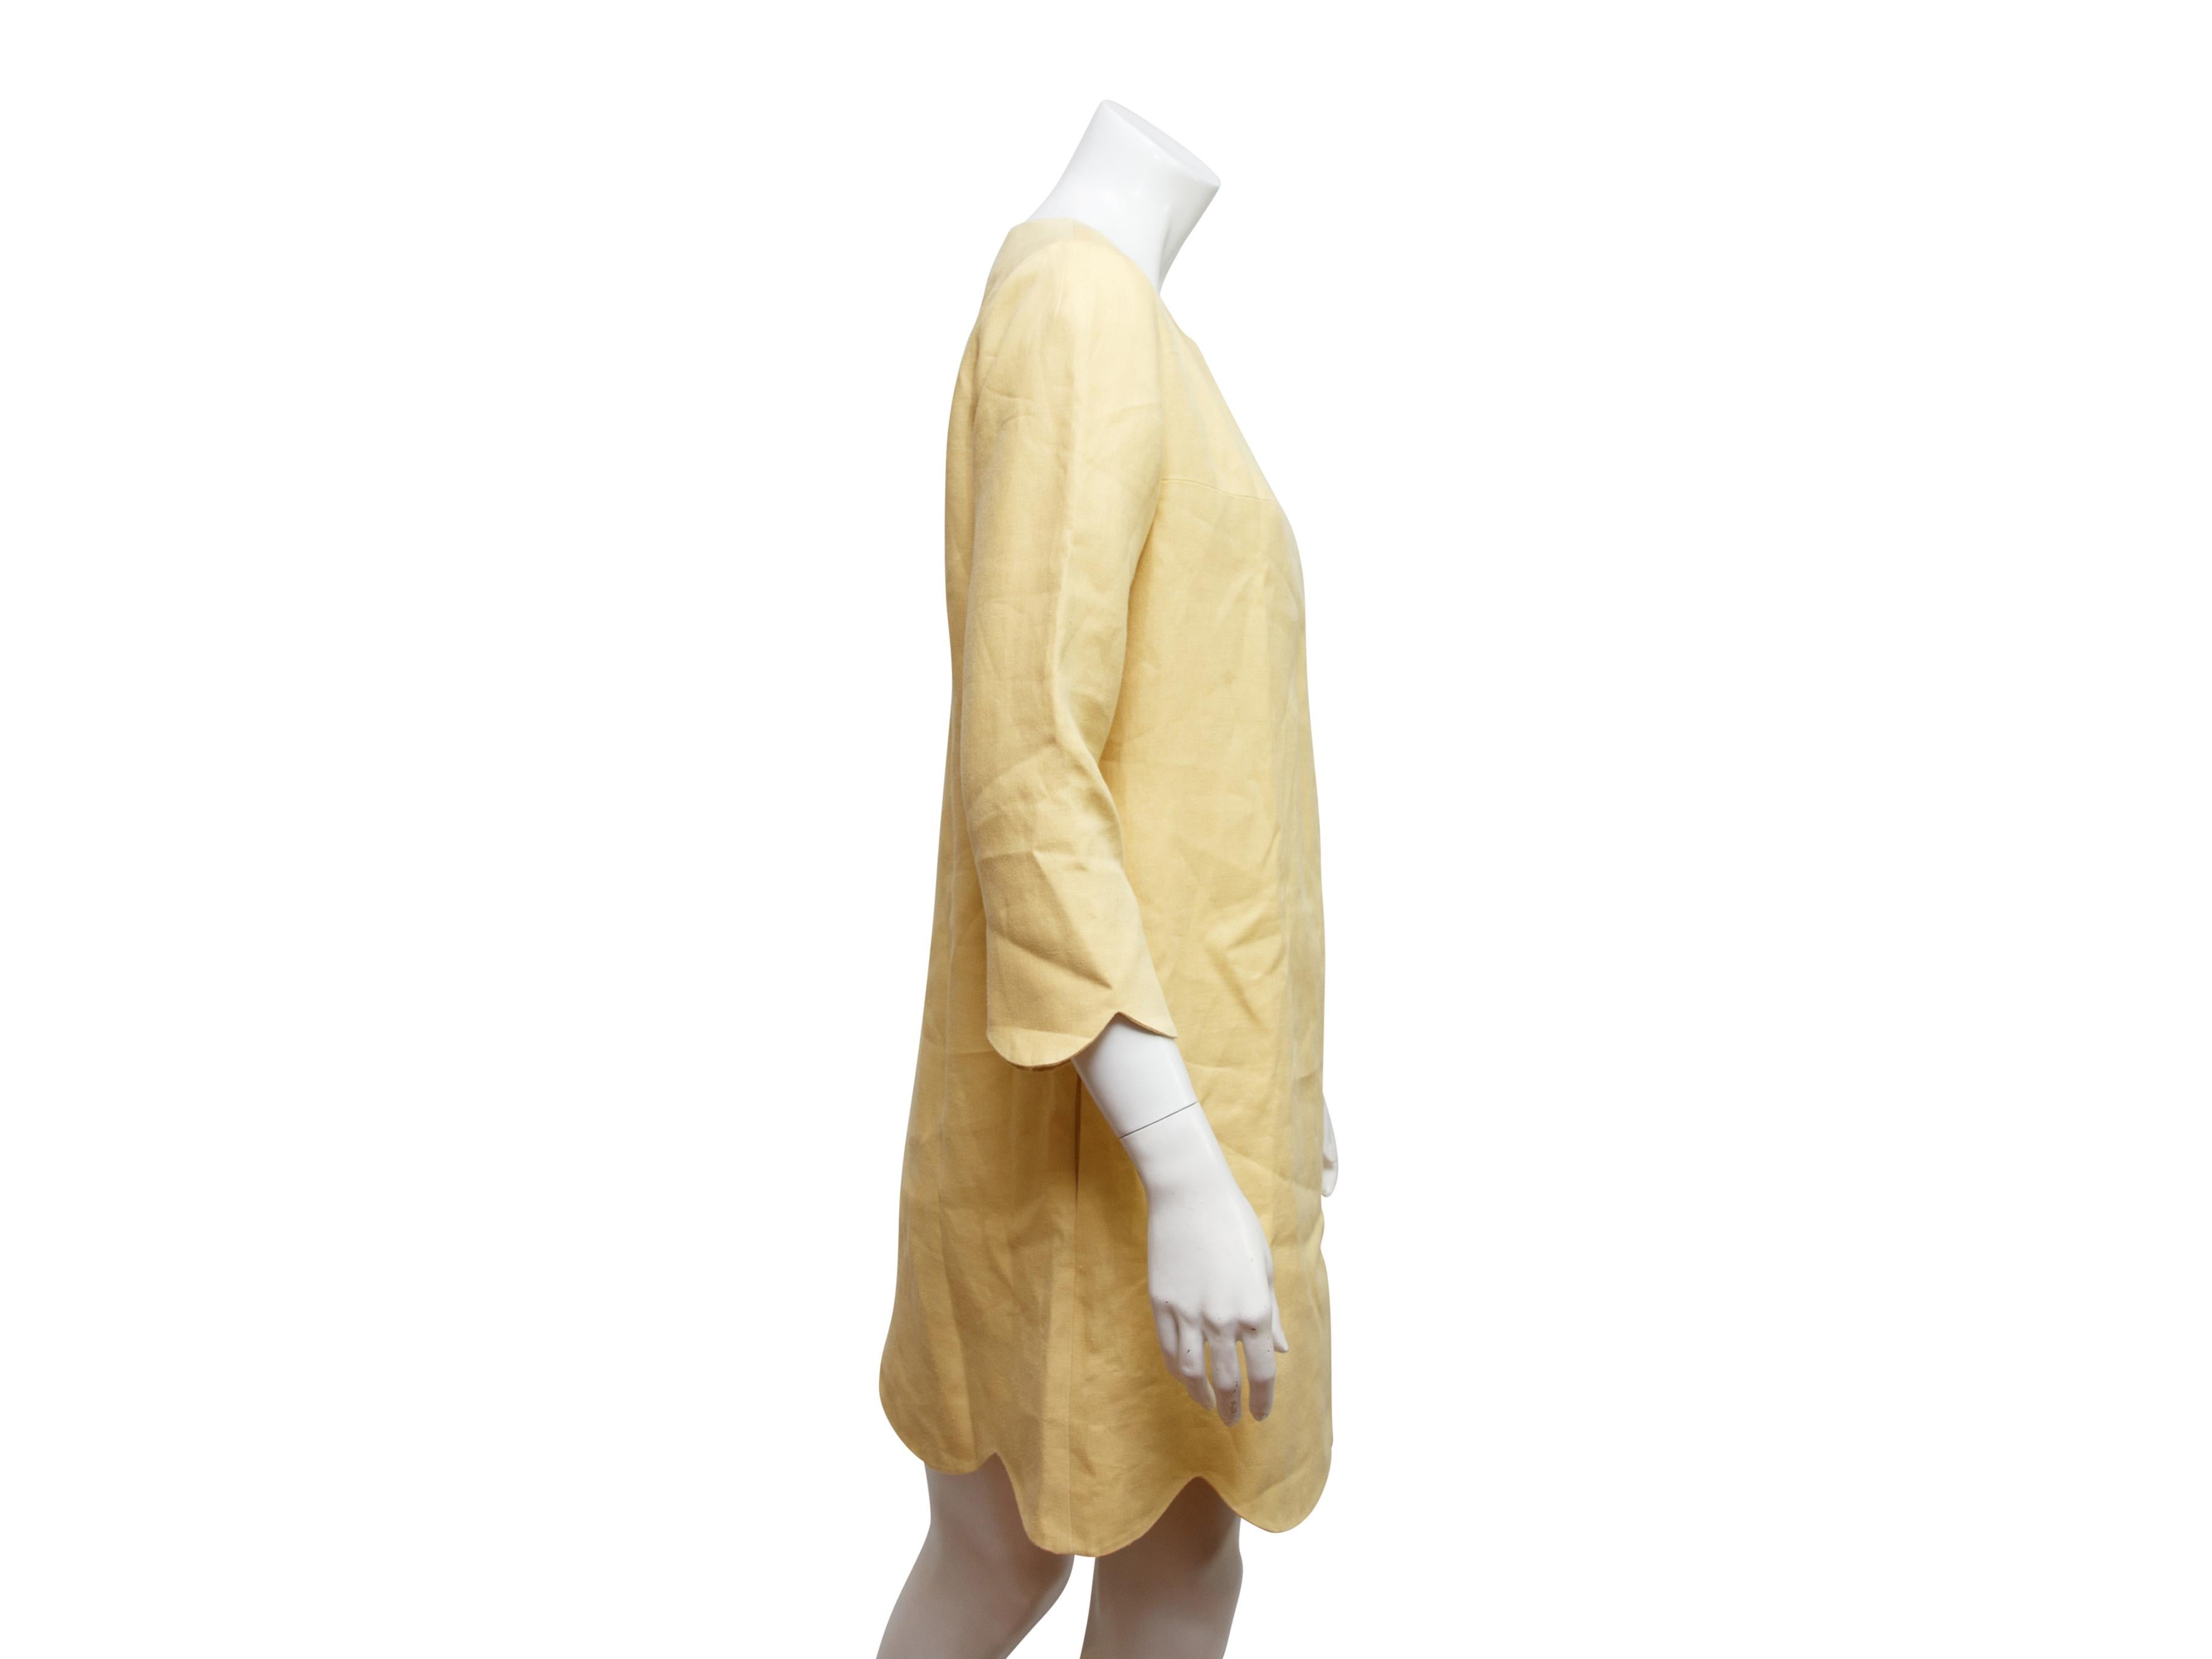 Product details:  Yellow scallop-trimmed shift dress by Chloe.  Roundneck.  Three-quarter length sleeves.  Concealed back zip closure.  Label size FR 40.  38